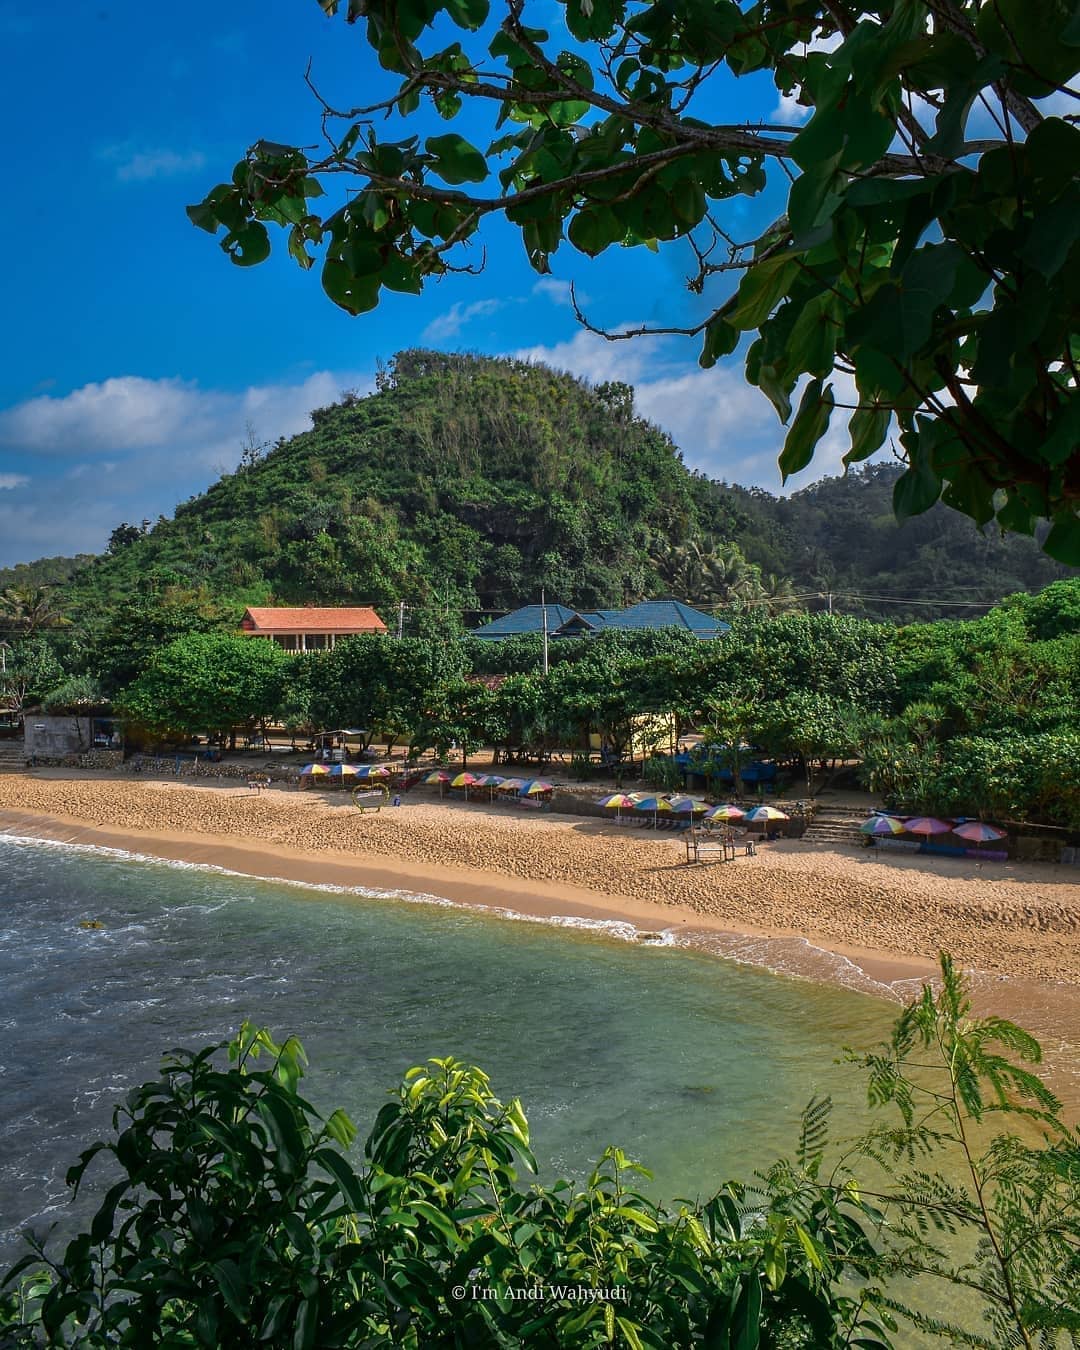 Indrayanti Beach with colorful umbrellas, calm waters, and lush greenery in the background.